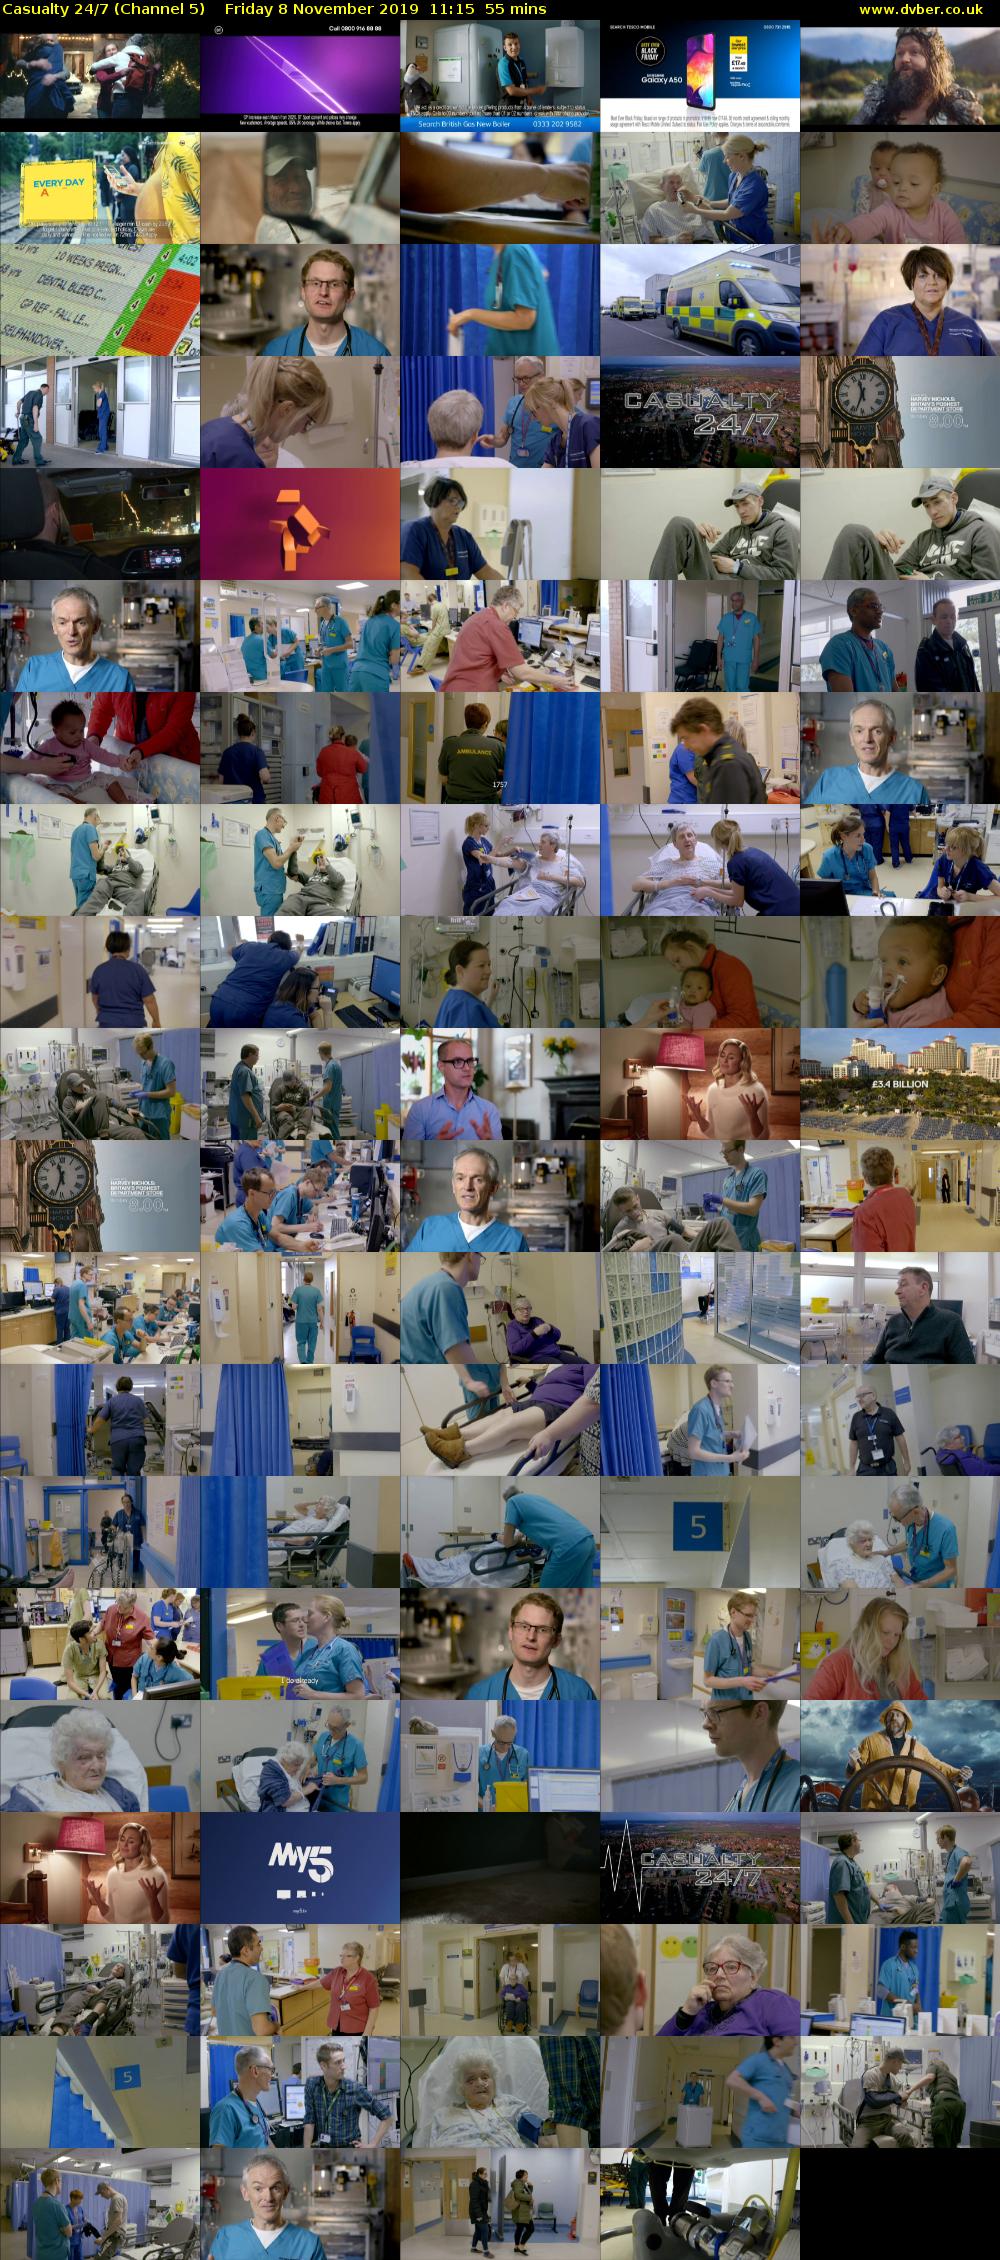 Casualty 24/7 (Channel 5) Friday 8 November 2019 11:15 - 12:10